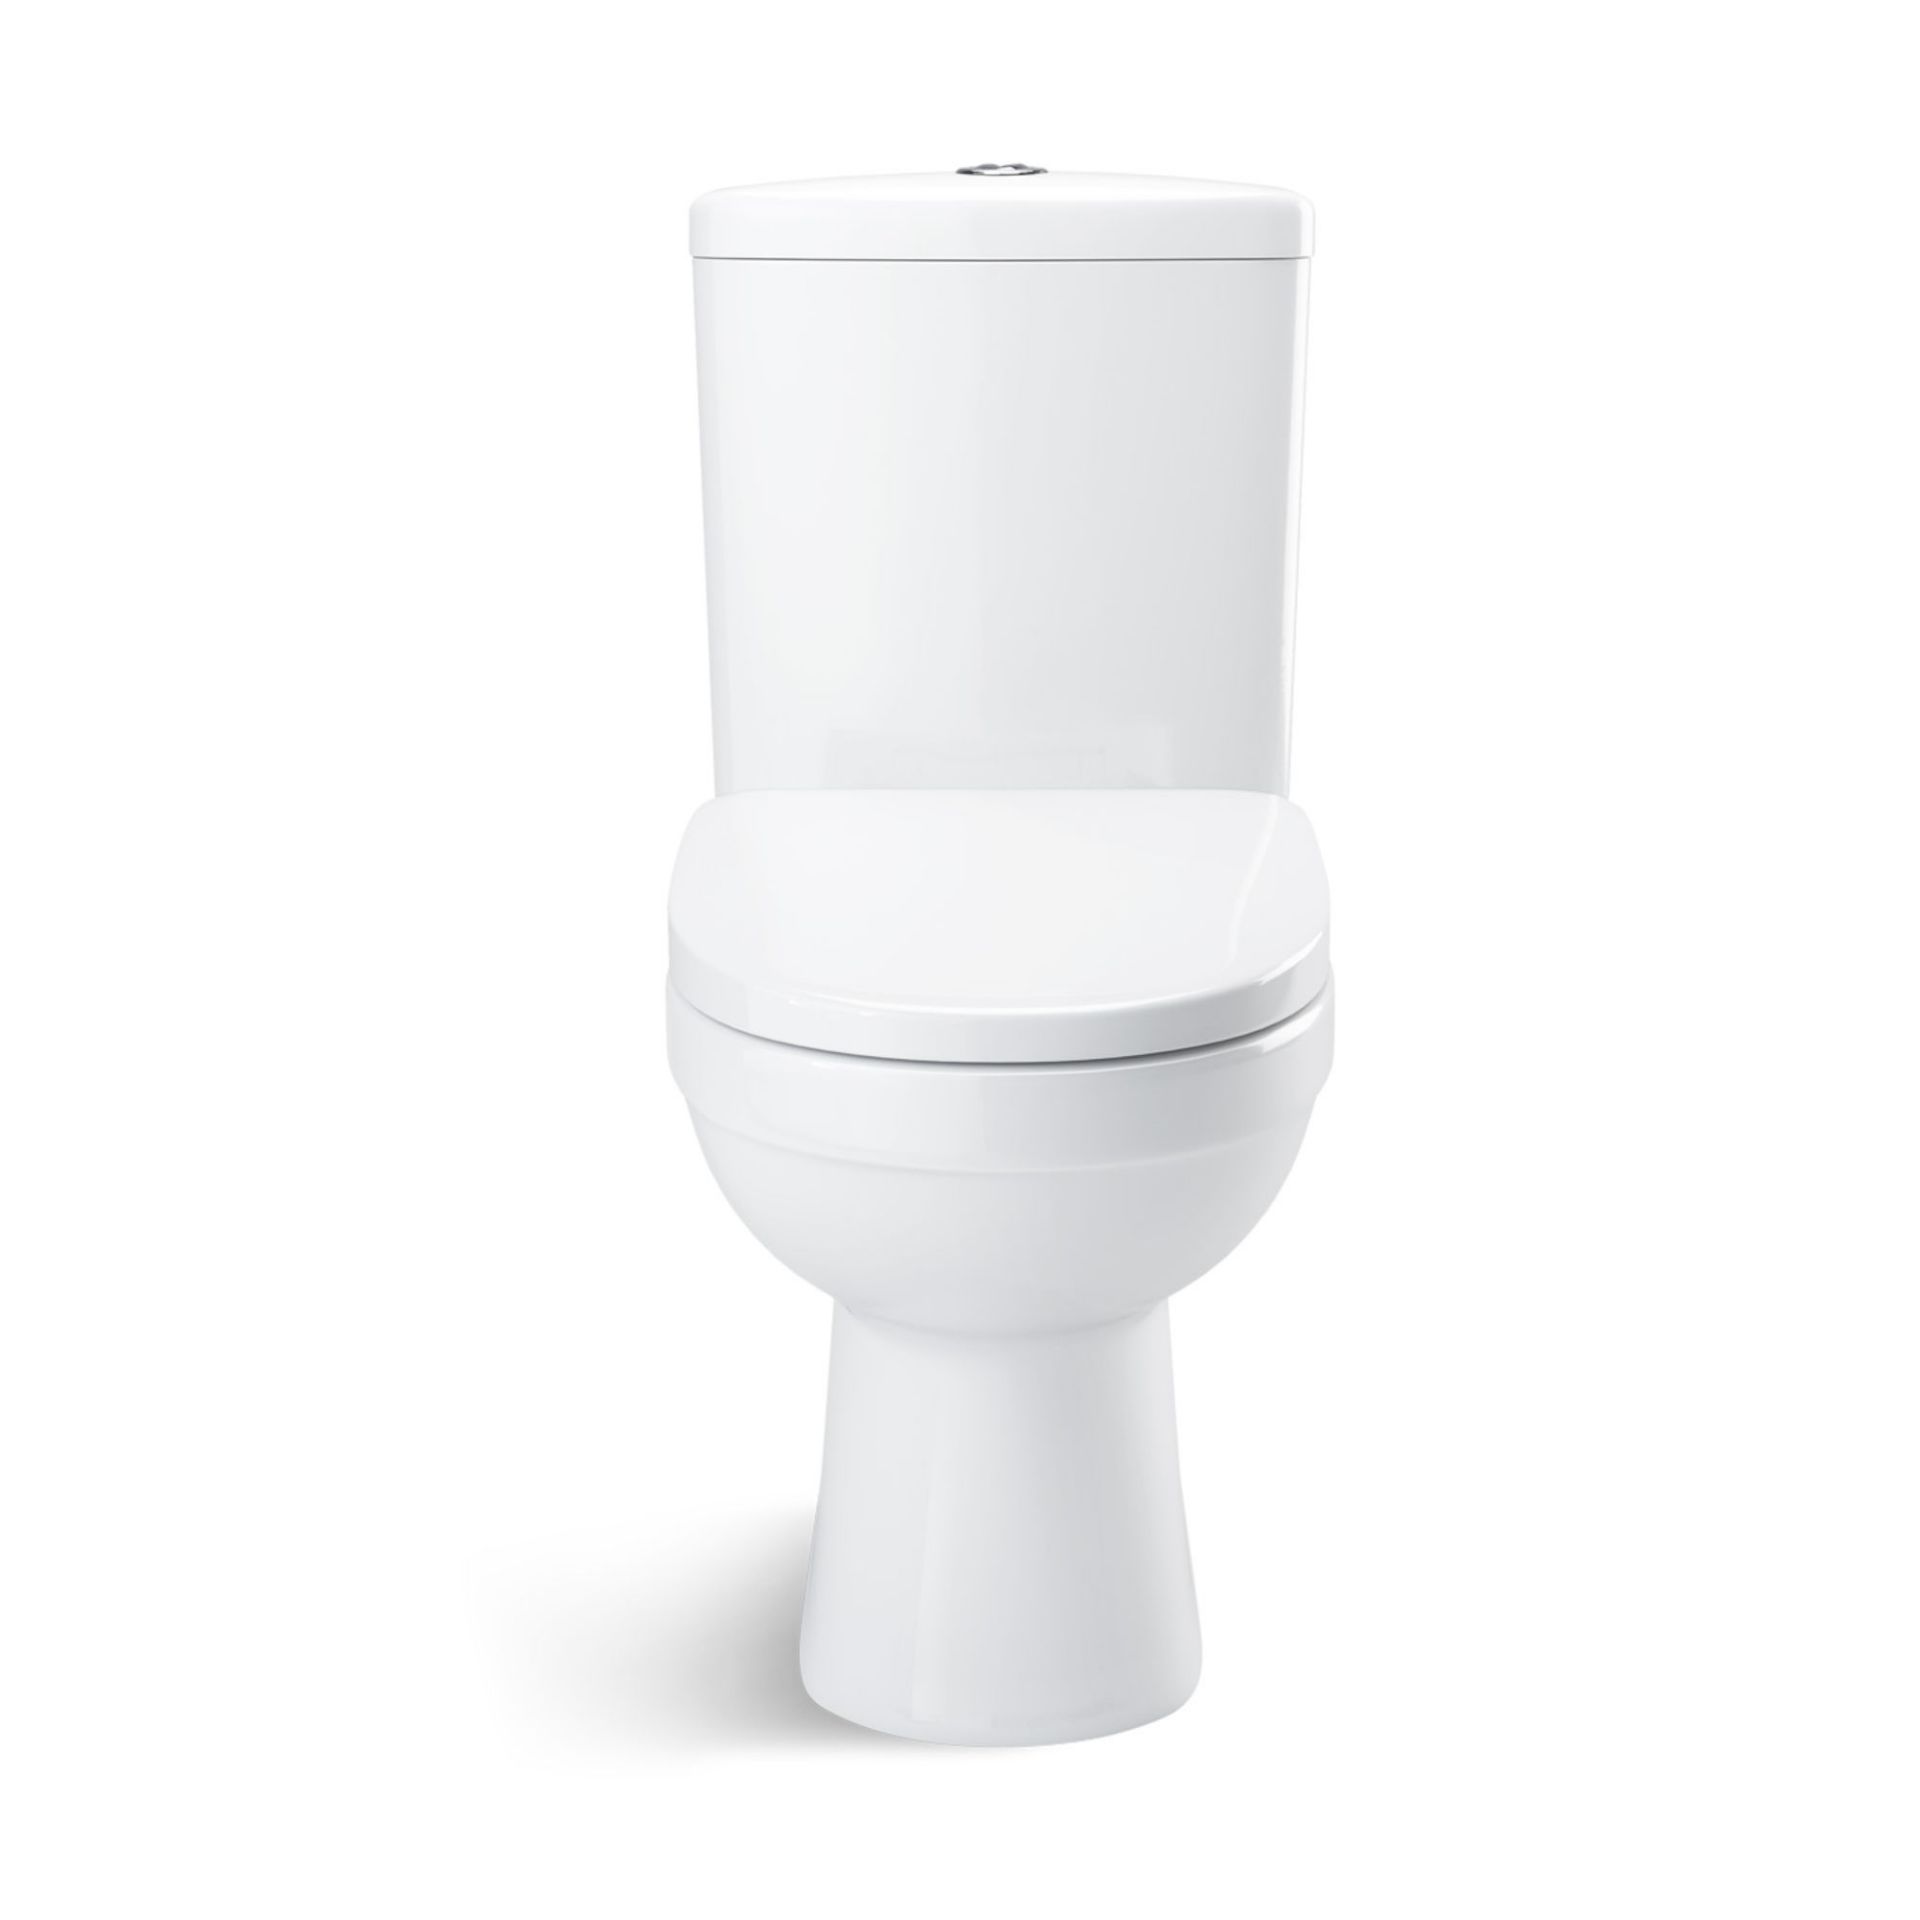 (MW31) Sabrosa II Close Coupled Toilet & Cistern inc Soft Close Seat. Made from White Vitreous China - Image 3 of 4